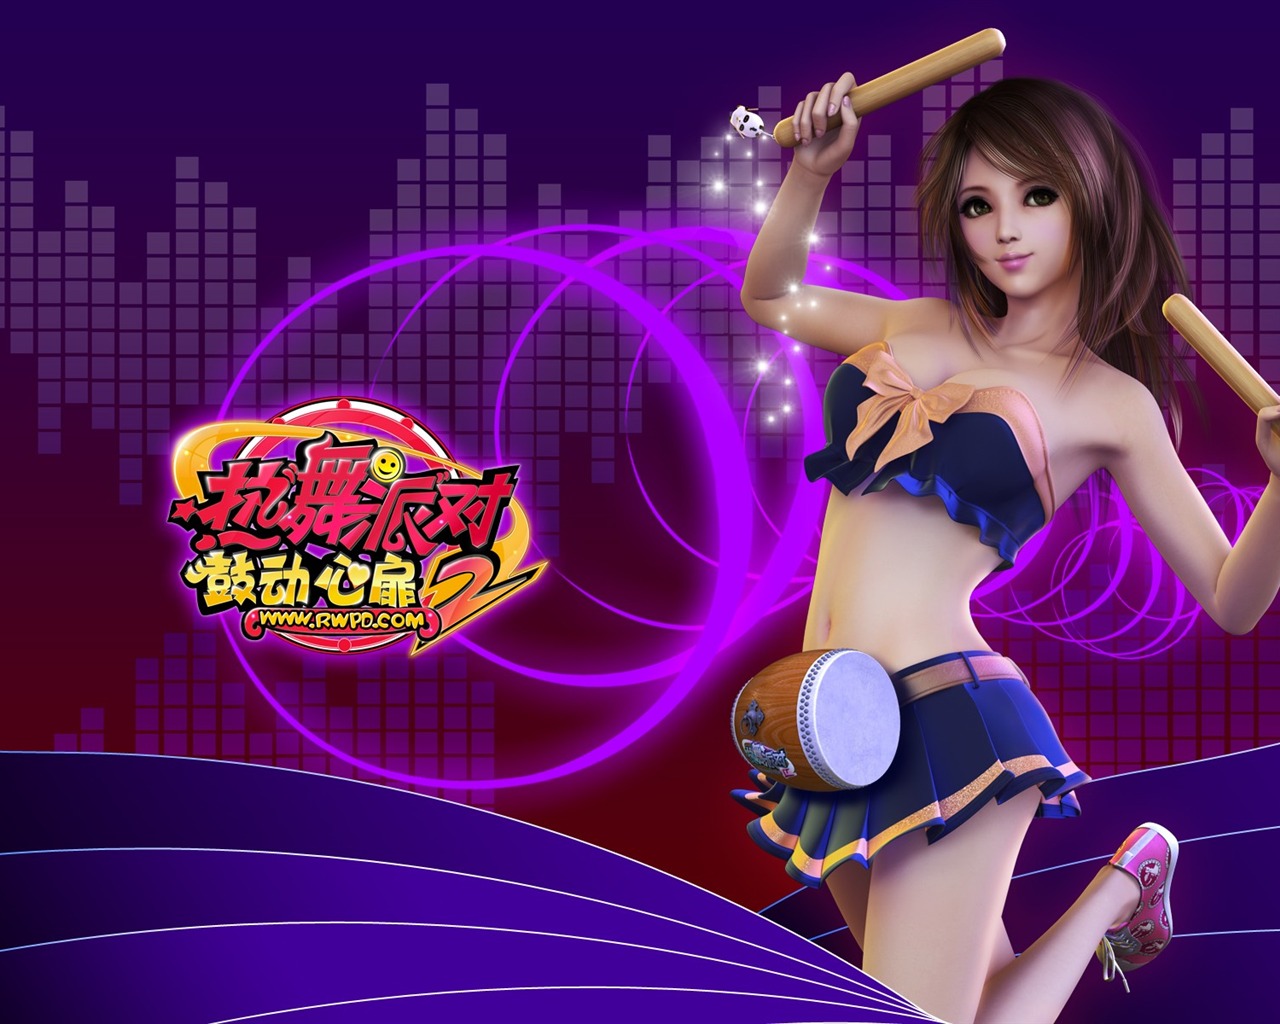 Online game Hot Dance Party II official wallpapers #17 - 1280x1024